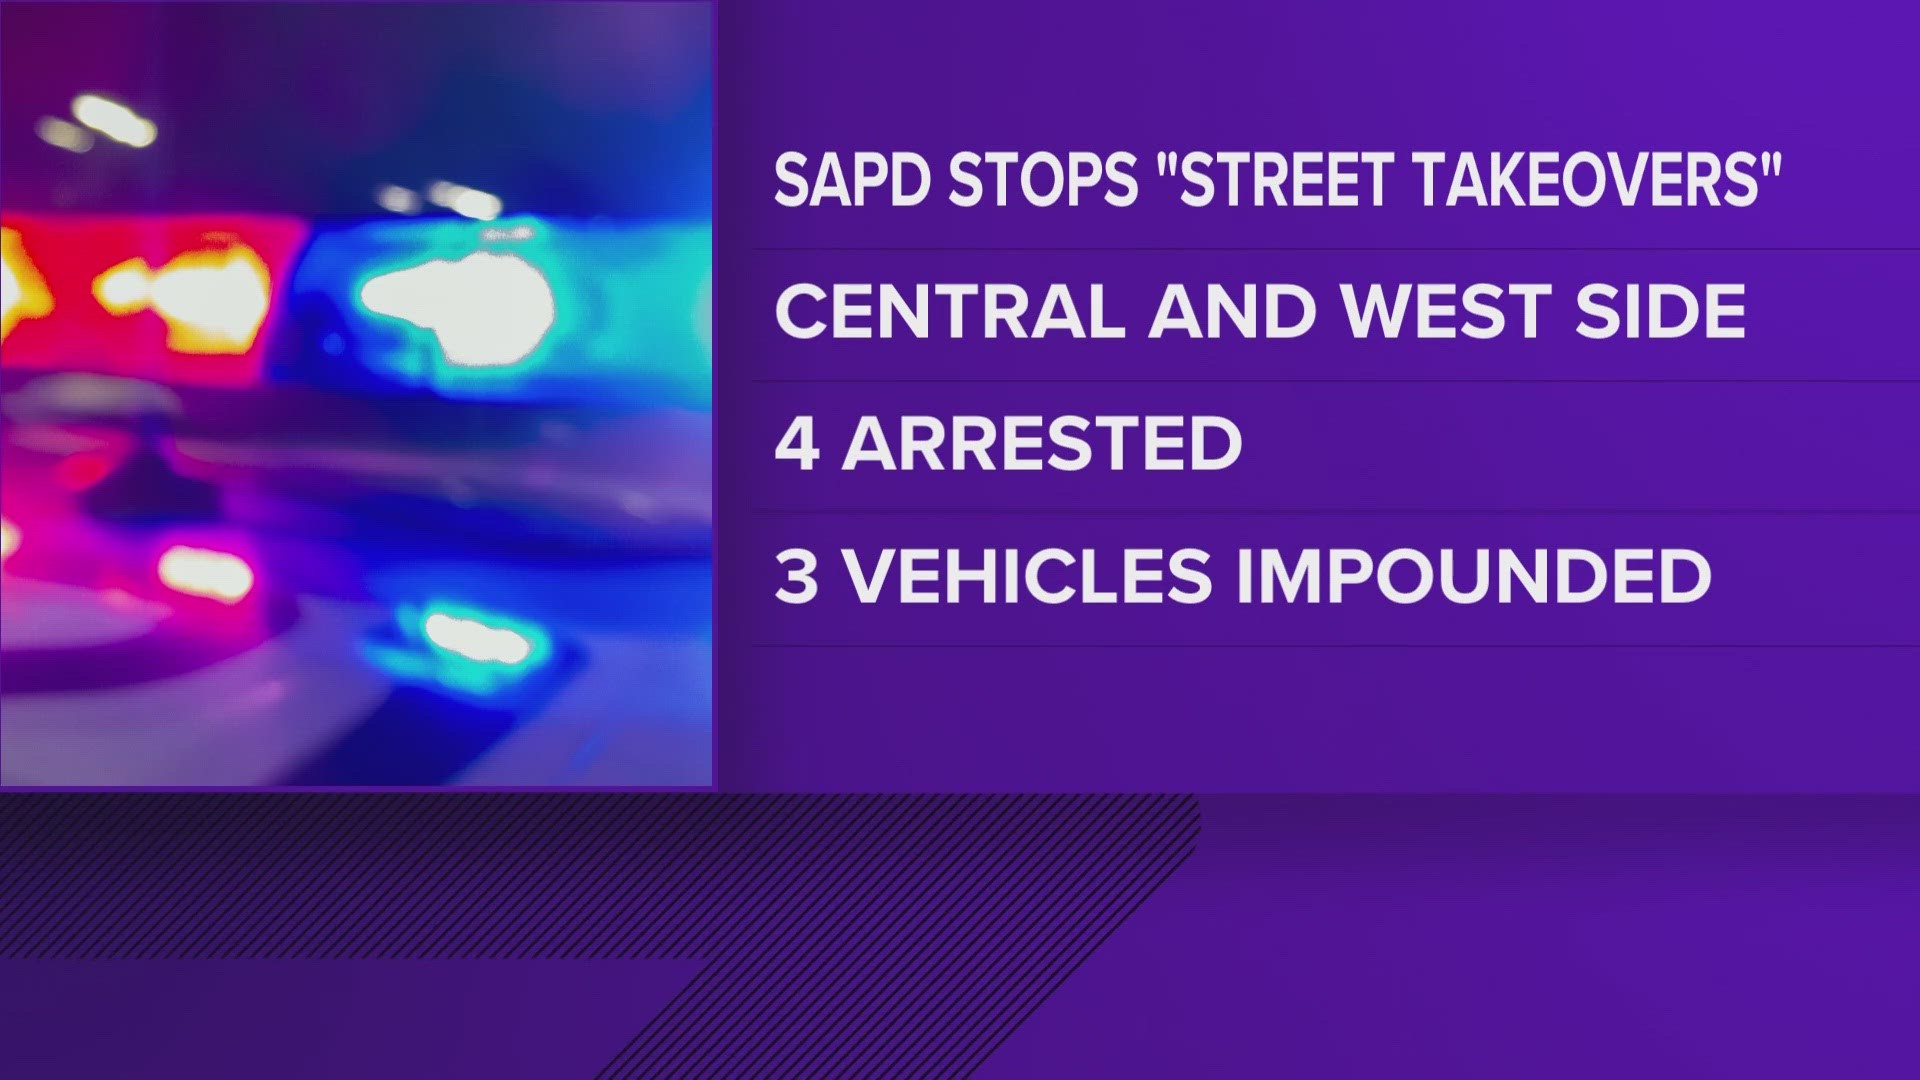 The vehicle crashed and and four teens fled on foot, according to San Antonio Police.